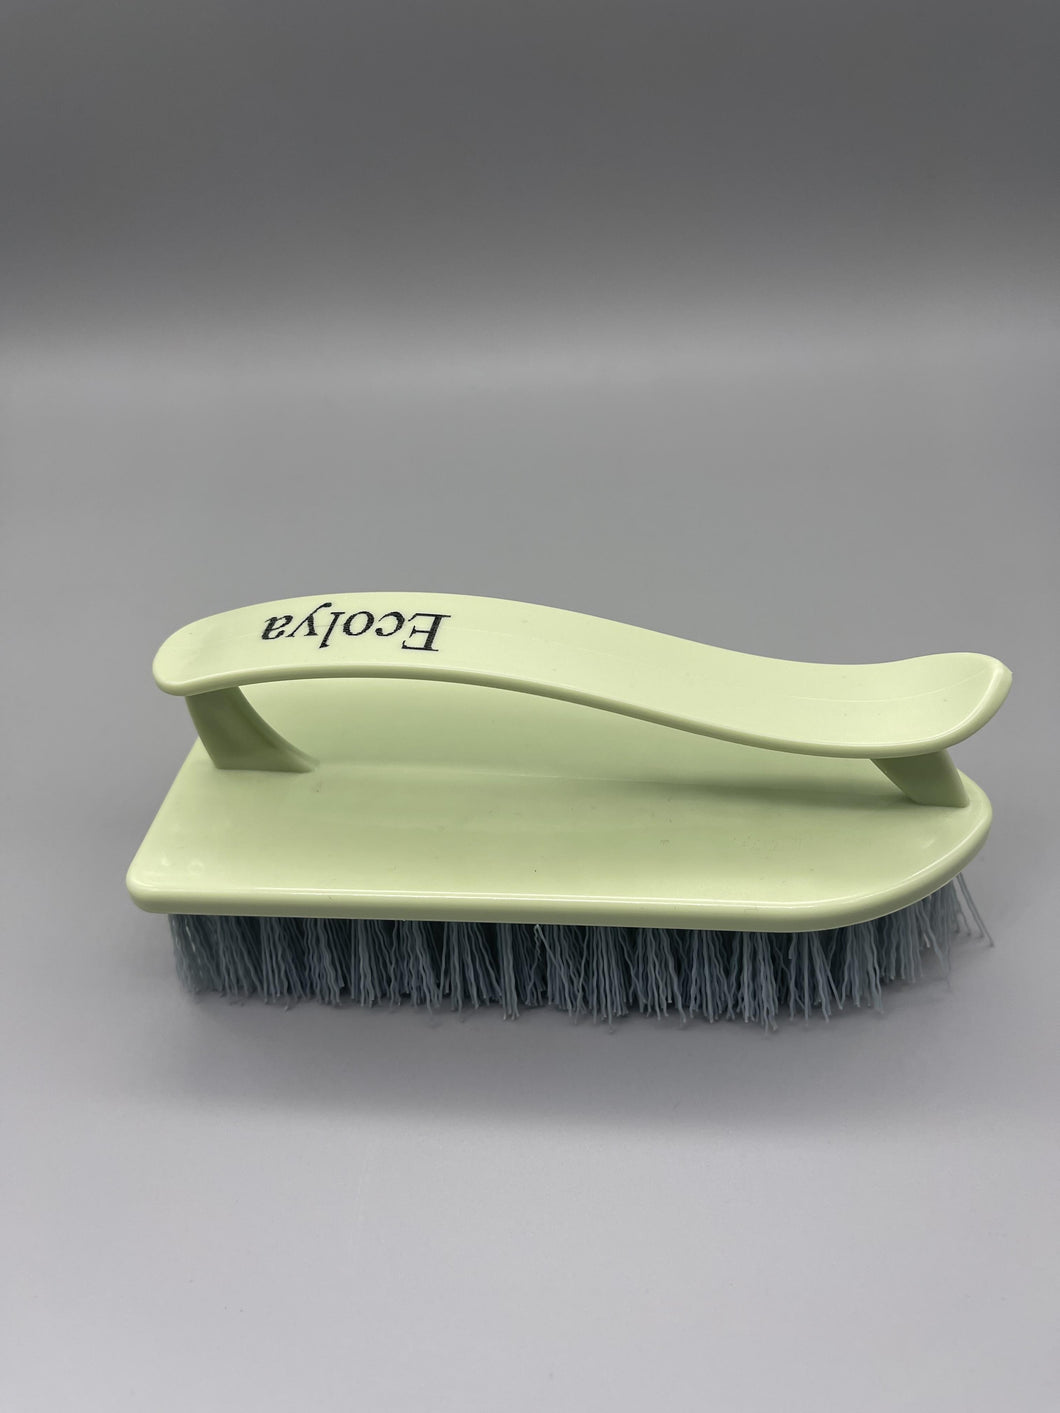 Ecolya Cleaning brushes for household use, Tile, Bathroom, Kitchen. Easy to Handle, Strong Fibers for Tough Messes , Green Scrub Brush for CleaningSet with Handles,Floor, Tub, Carpet, Shower, Tile and Kitchen